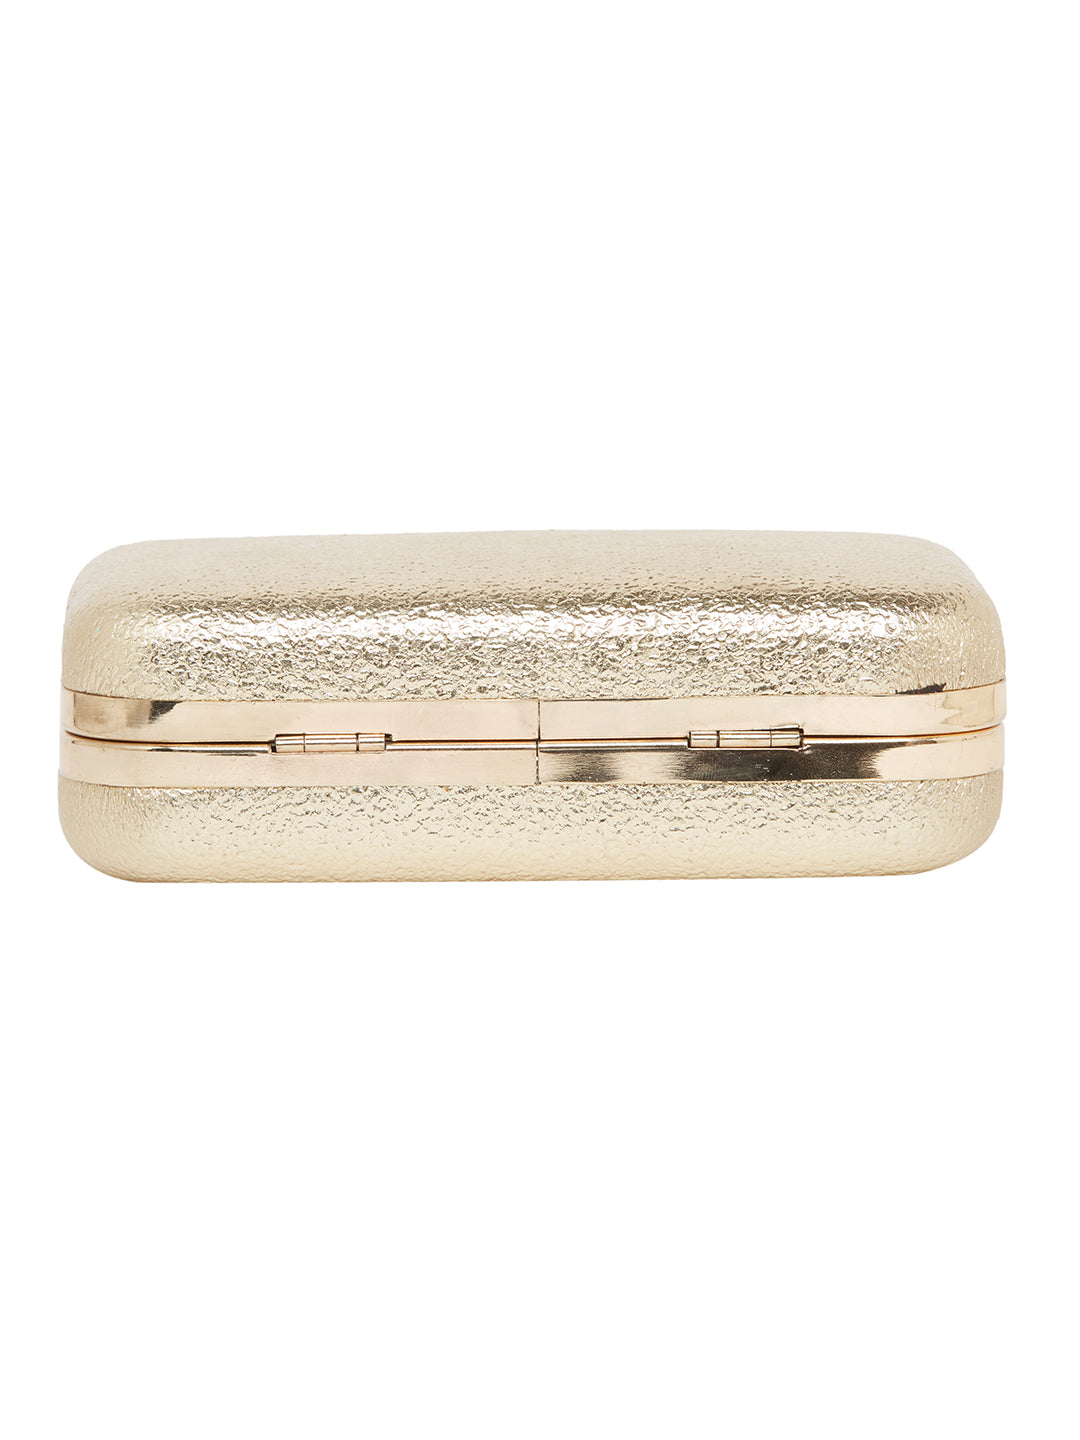 A Vdesi base gold clutch bag with a metal chain on a white background.